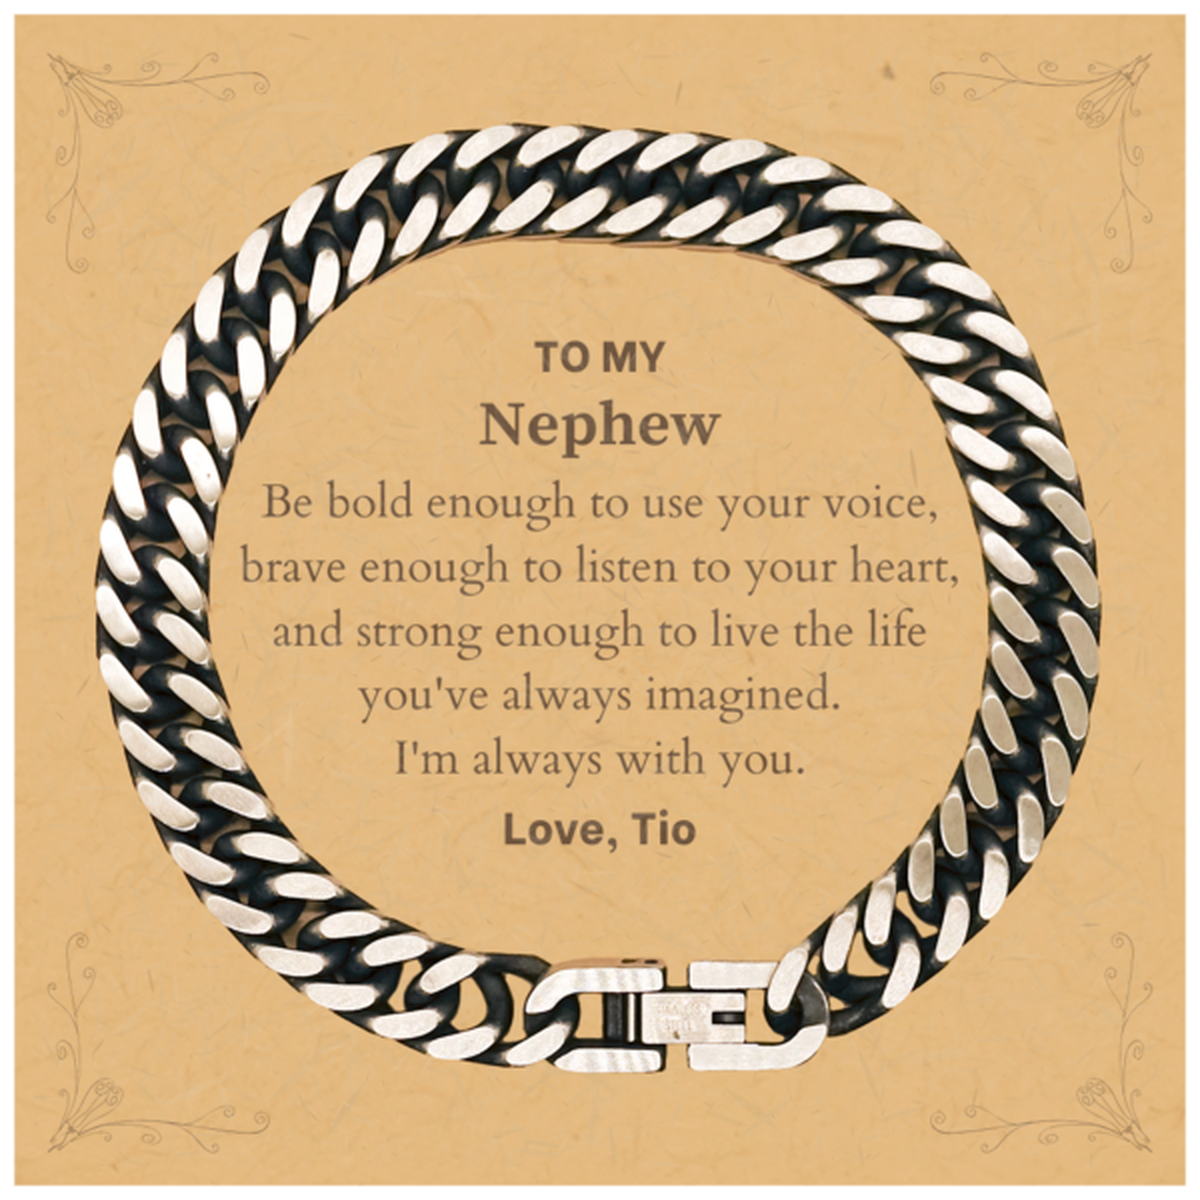 Keepsake Nephew Cuban Link Chain Bracelet Gift Idea Graduation Christmas Birthday Nephew from Tio, Nephew Be bold enough to use your voice, brave enough to listen to your heart. Love, Tio